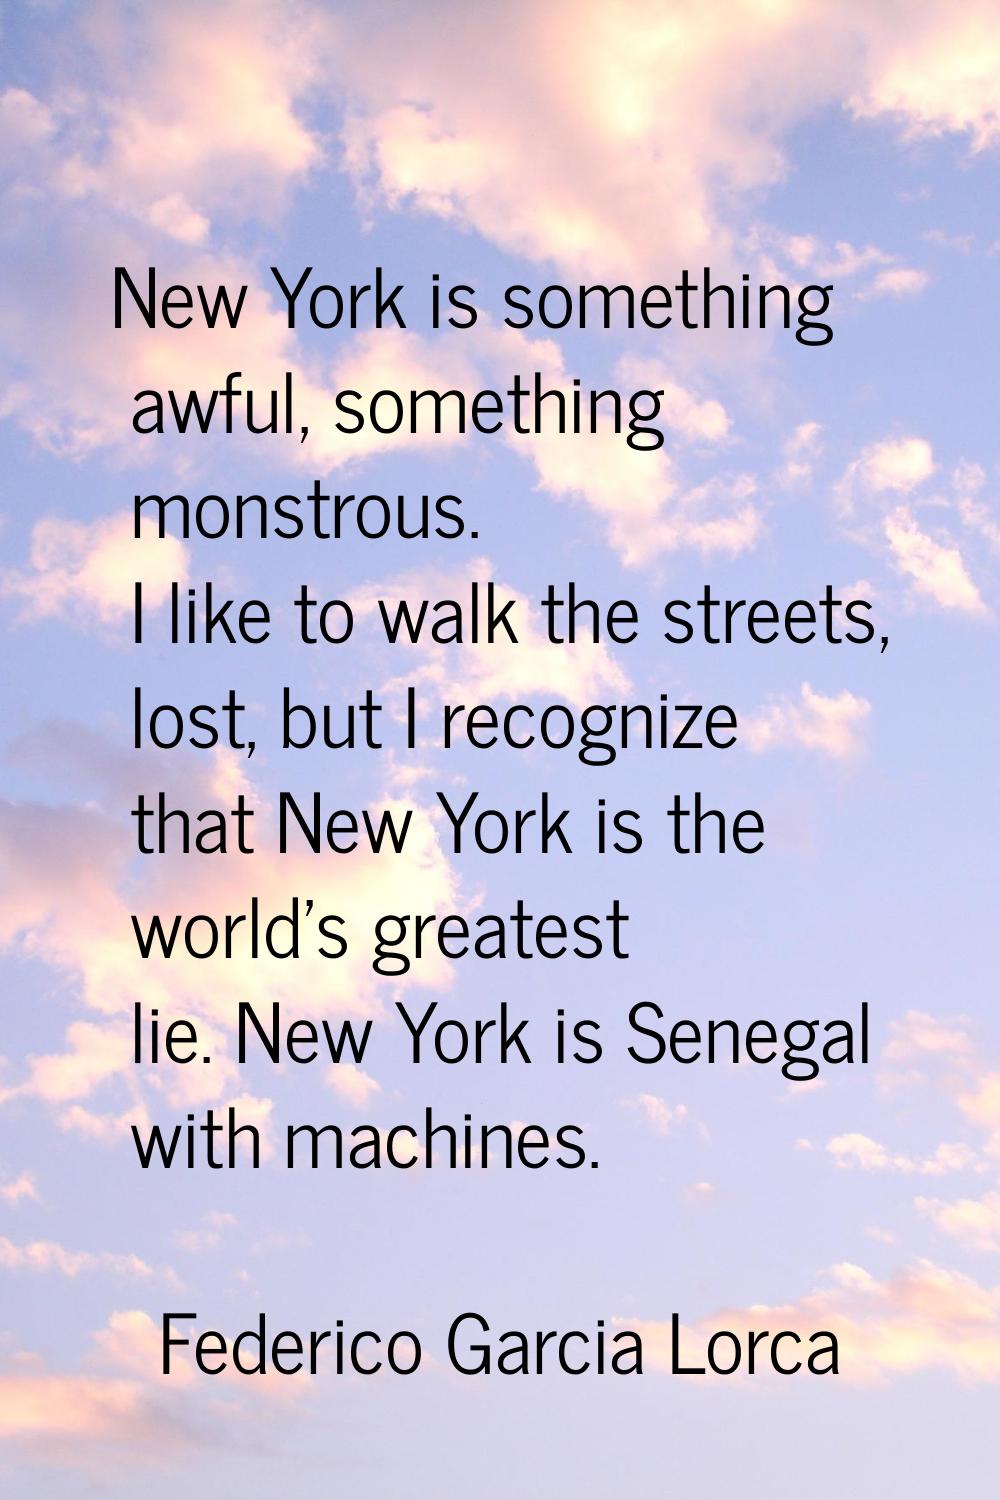 New York is something awful, something monstrous. I like to walk the streets, lost, but I recognize